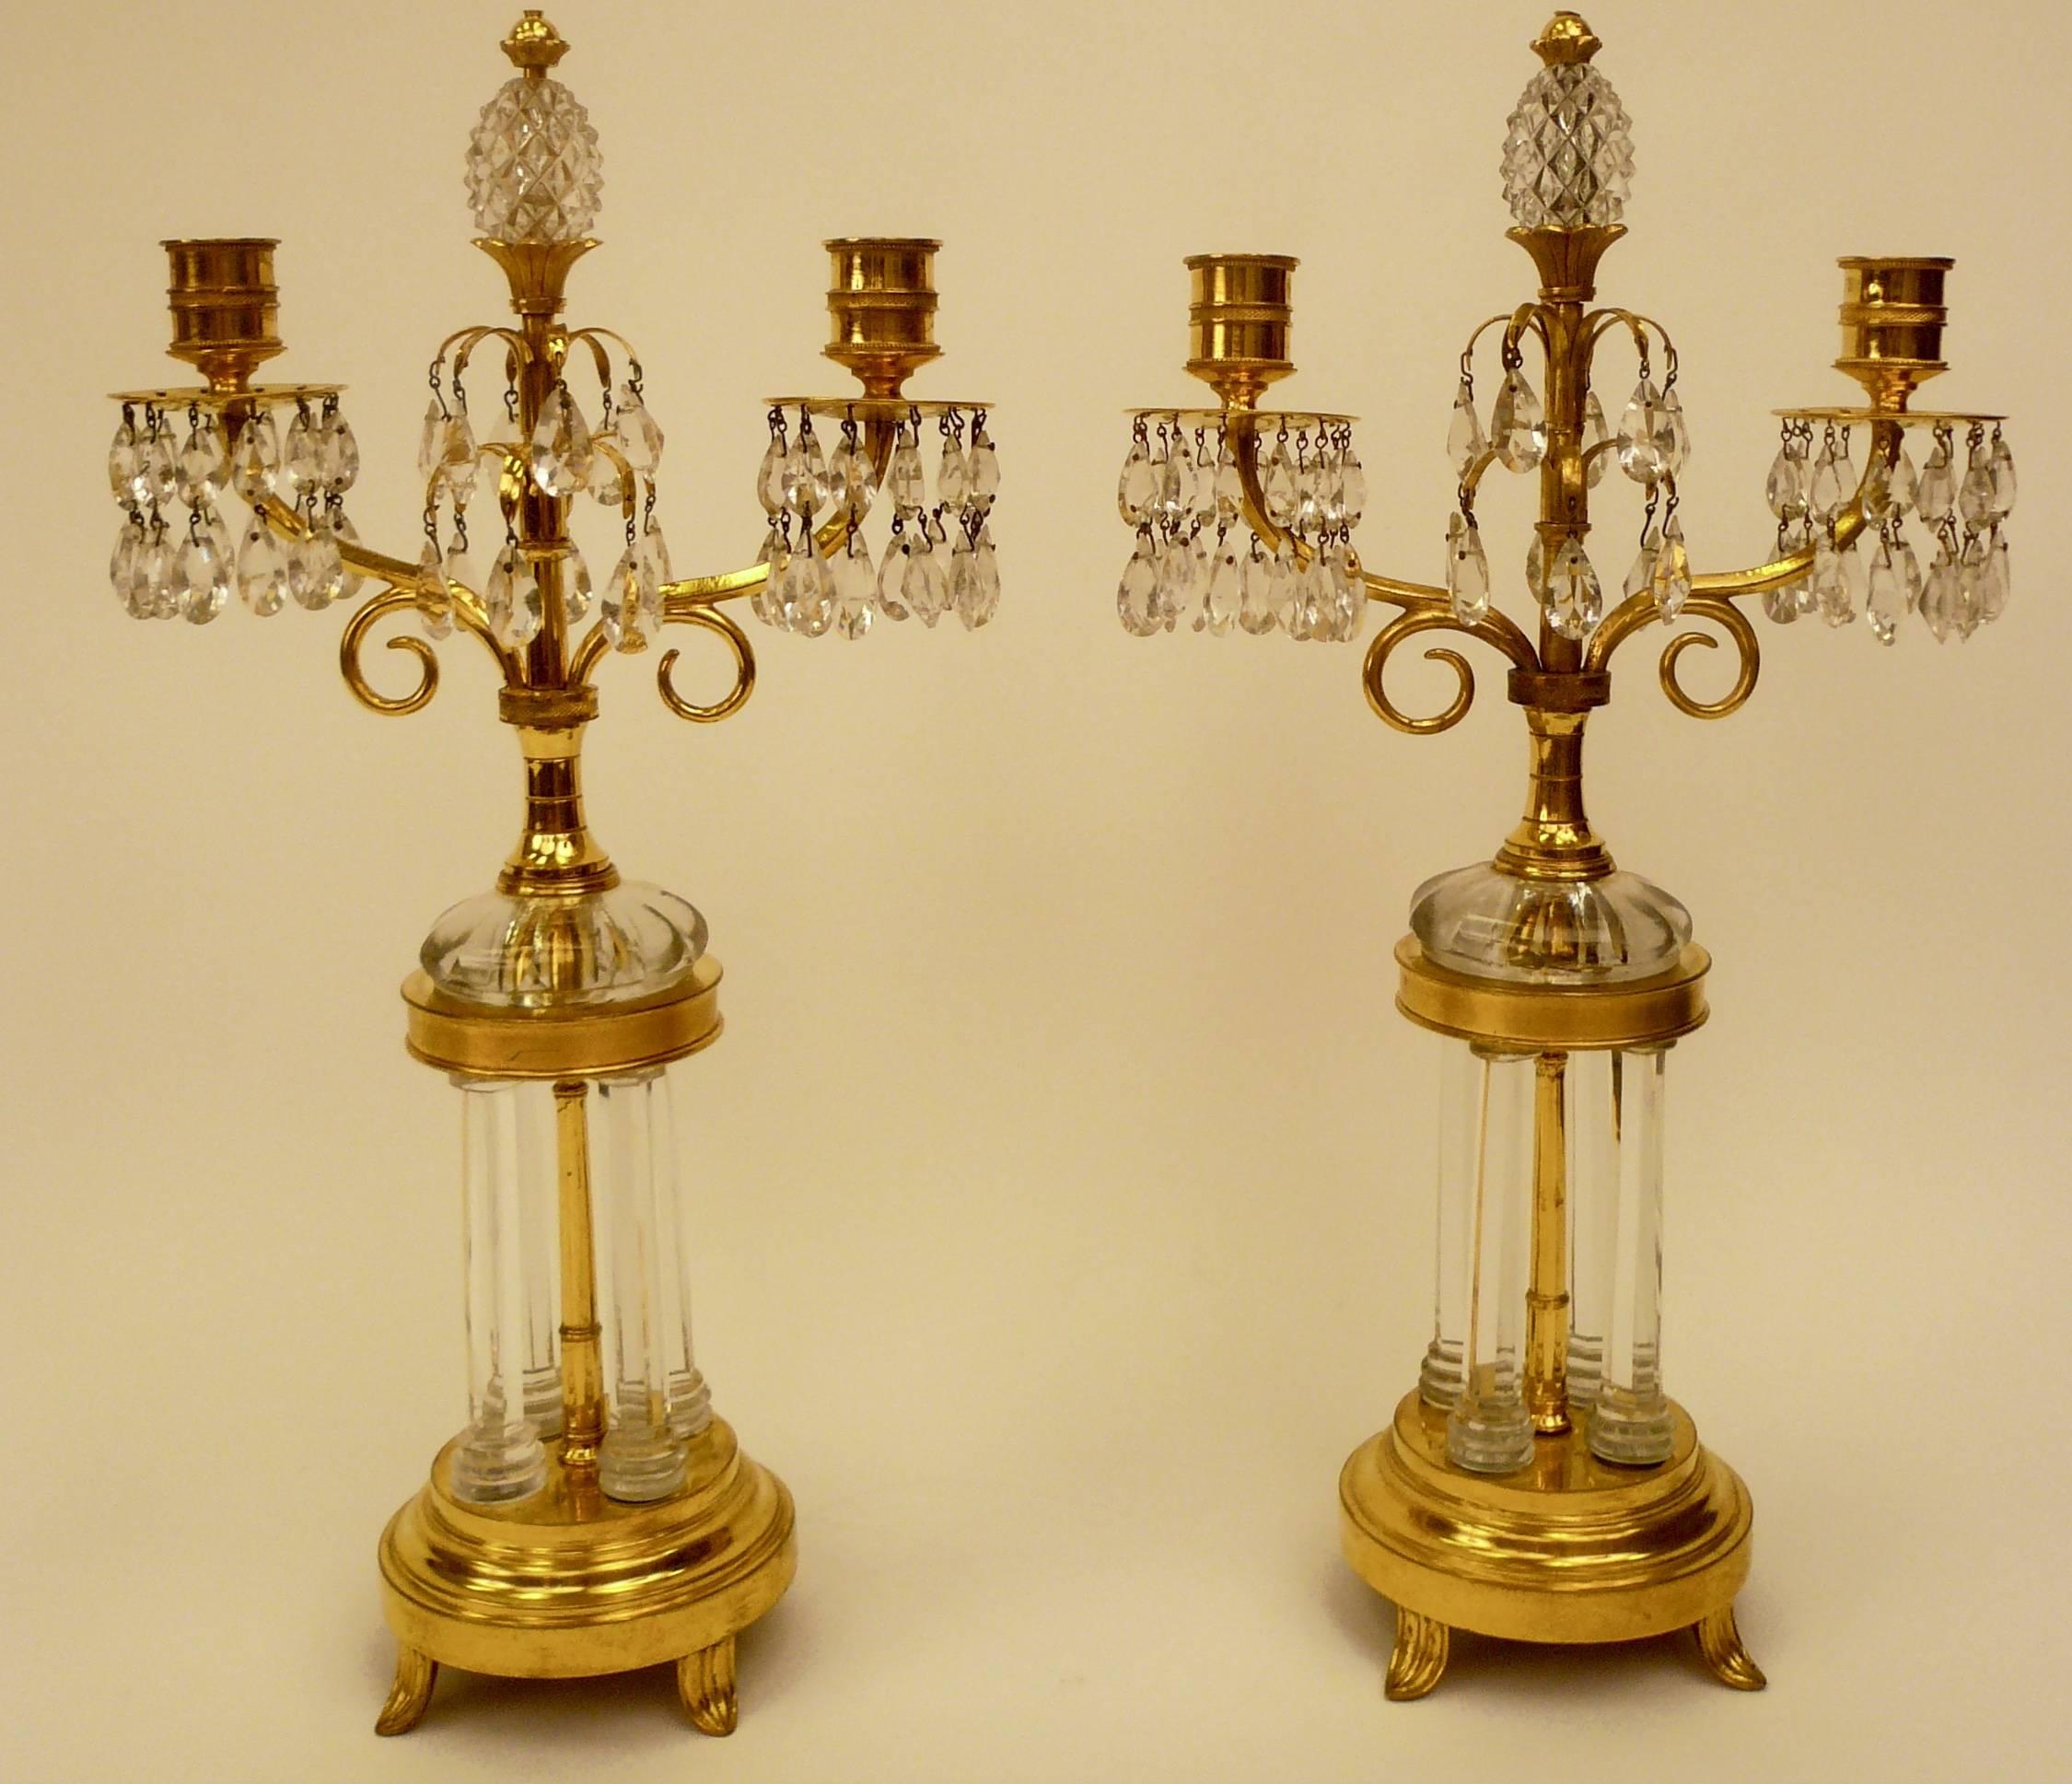 This pair of candelabra with bases in the form of miniature garden temples are attributed to William Parker and date from 1800. Parker supplied chandeliers to the Prince of Wales for Carlton House. See Martin Mortimer; The English glass chandelier,